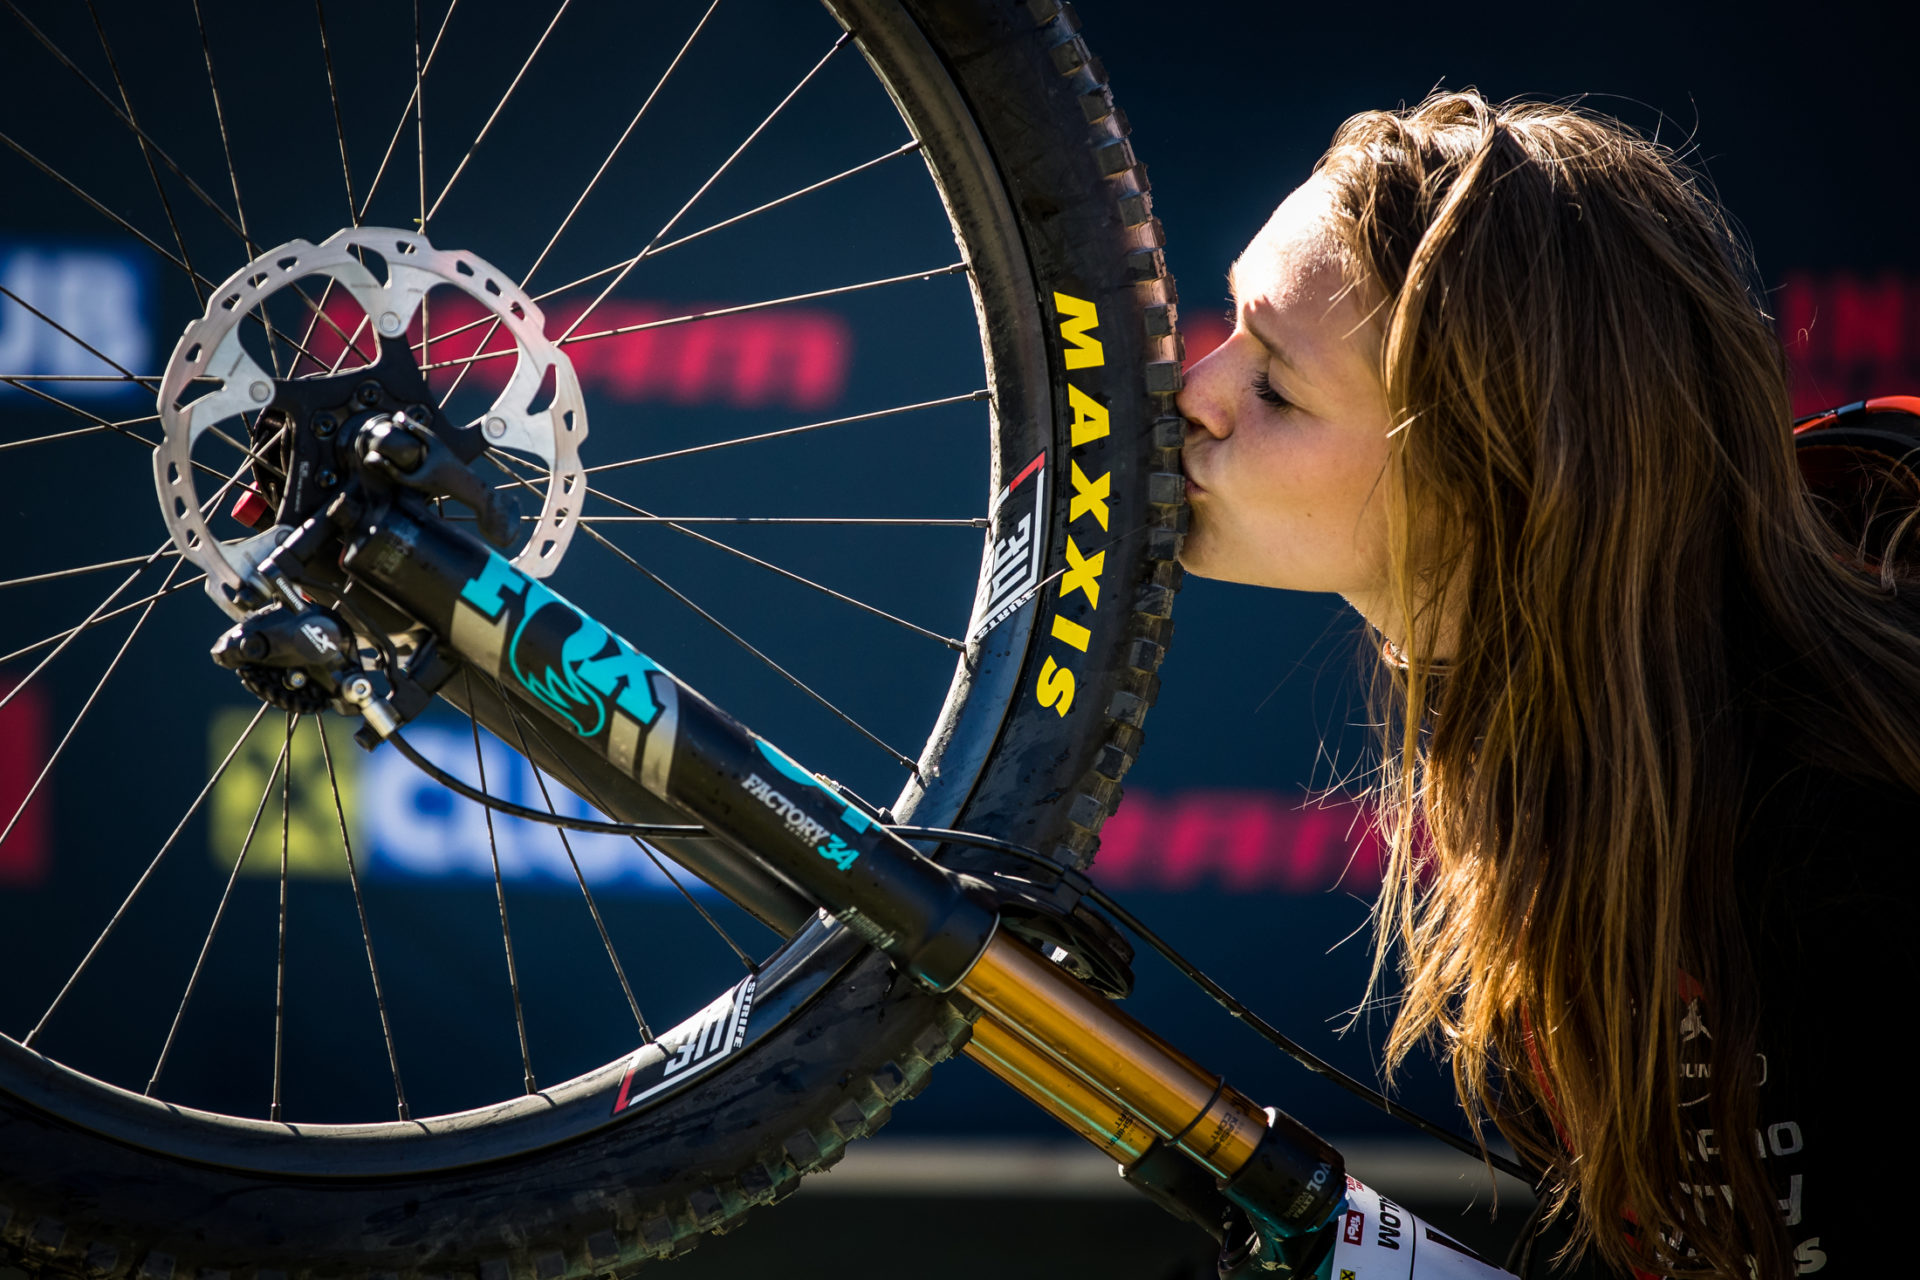 Verbeeck kissing her Maxxis tire